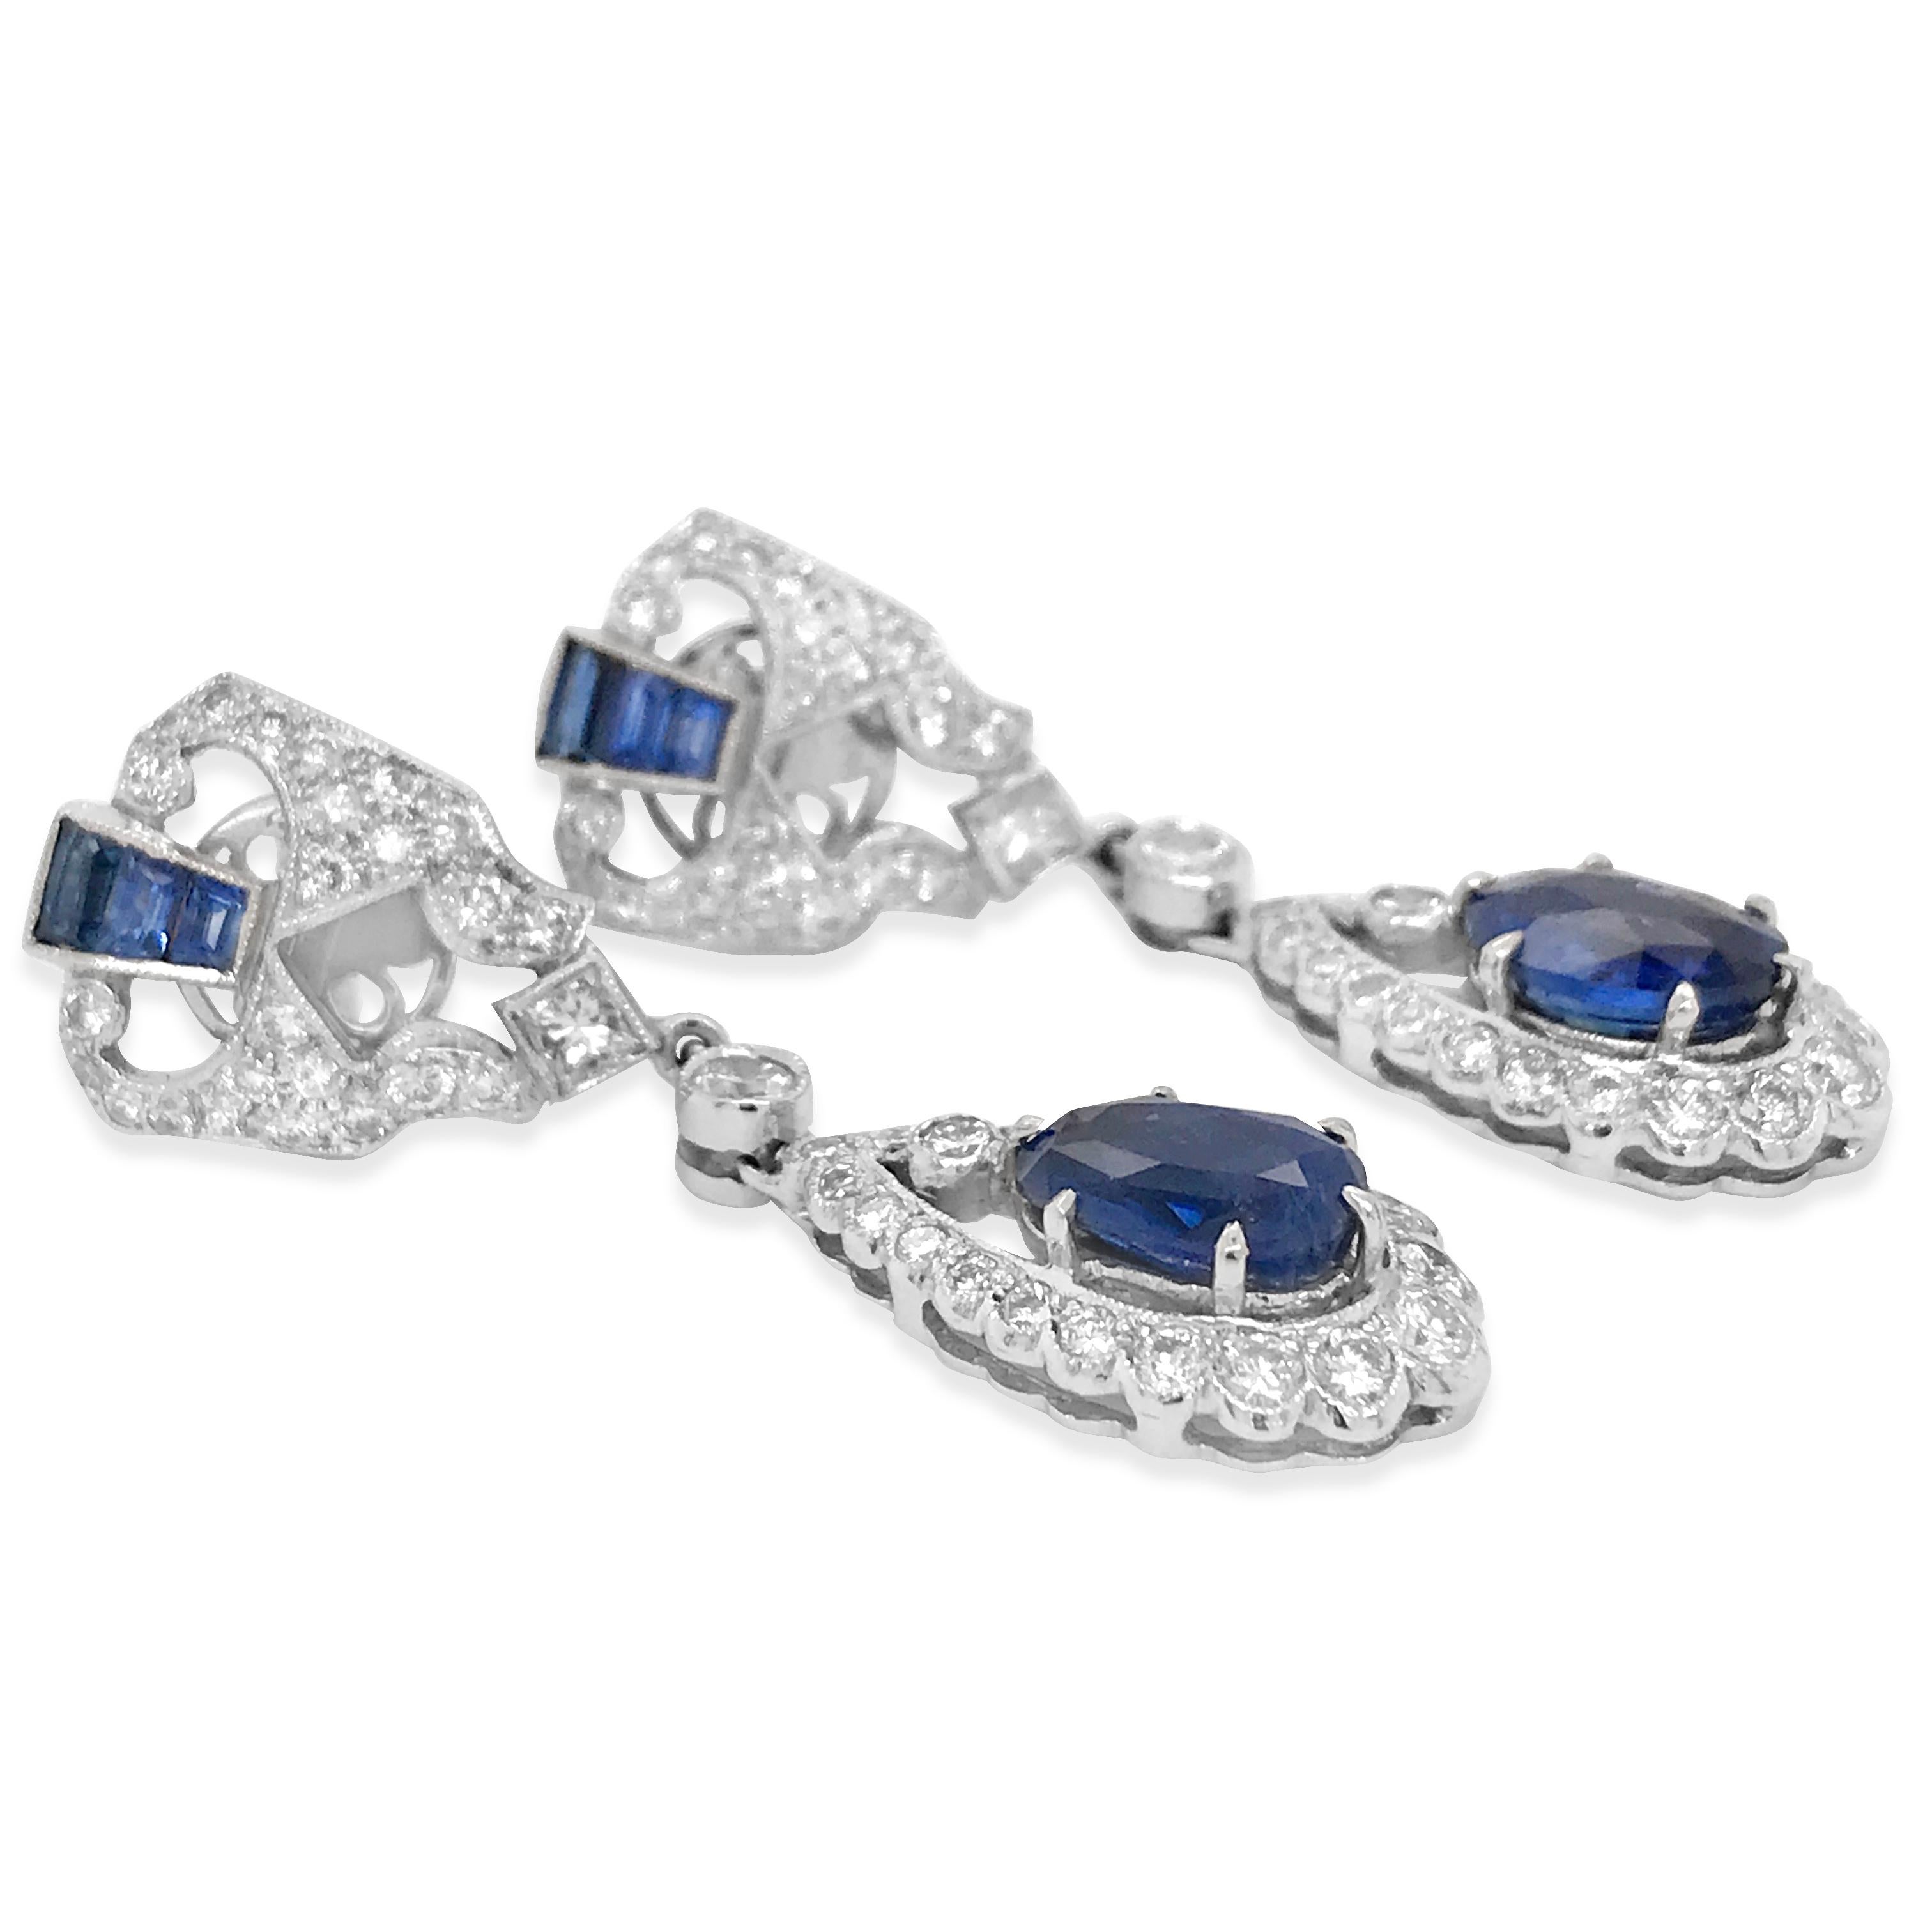 Oval Cut Pair of Diamond and Sapphire Earrings